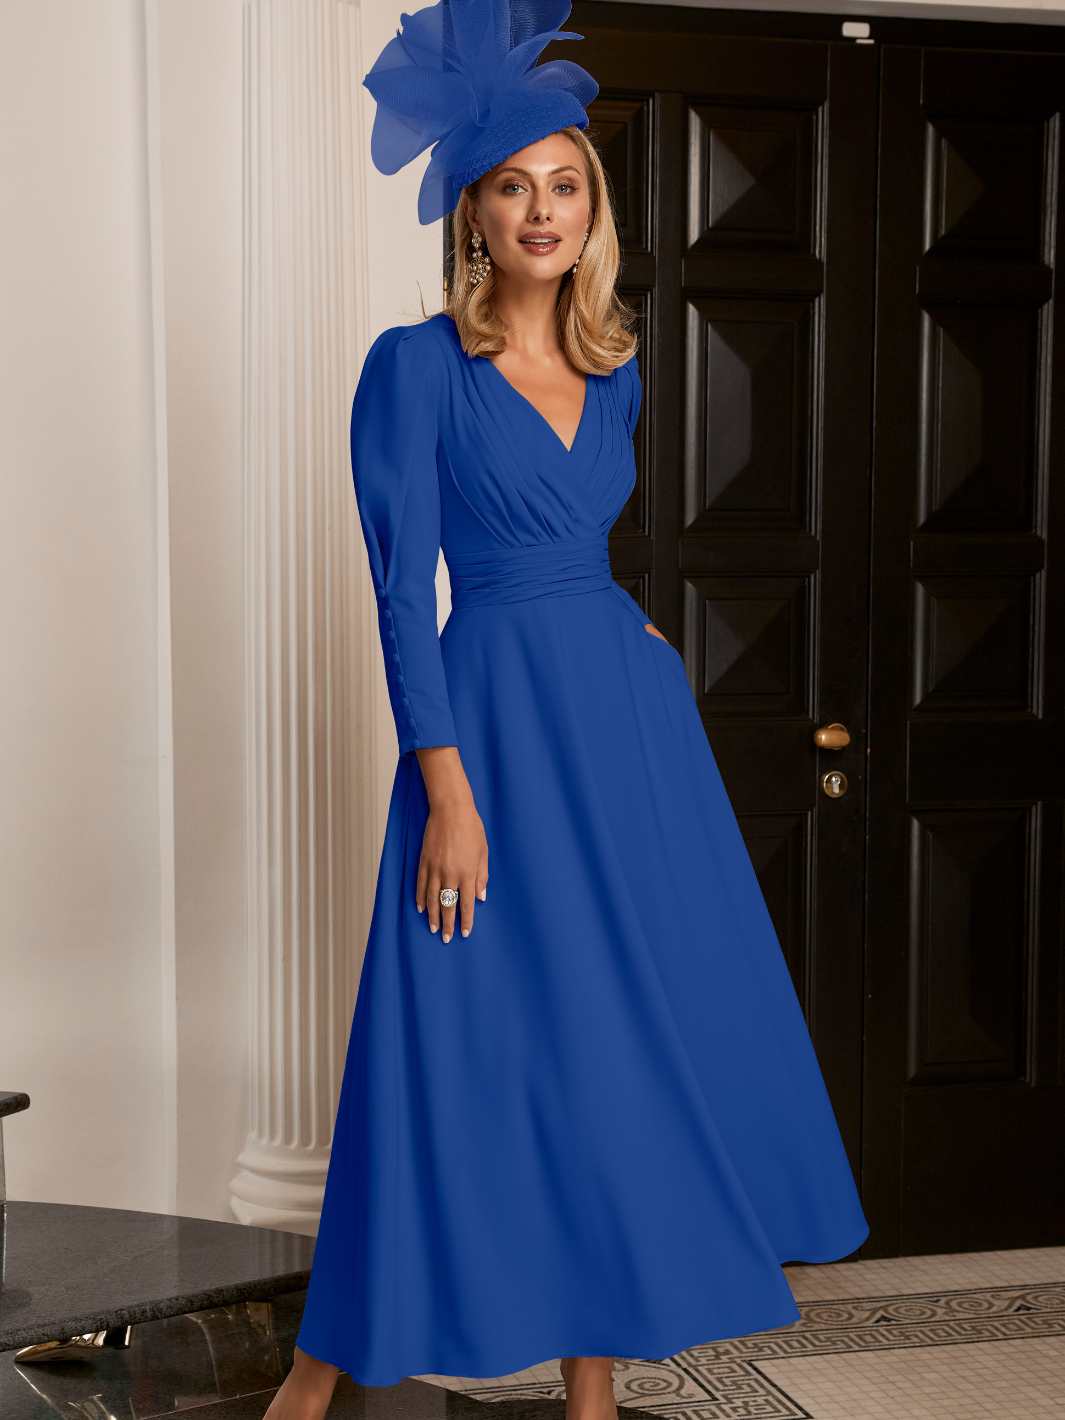 Veni Infantino 992128 - Royal Blue-Mother of the bride- mother of the groom -Nicola Ross